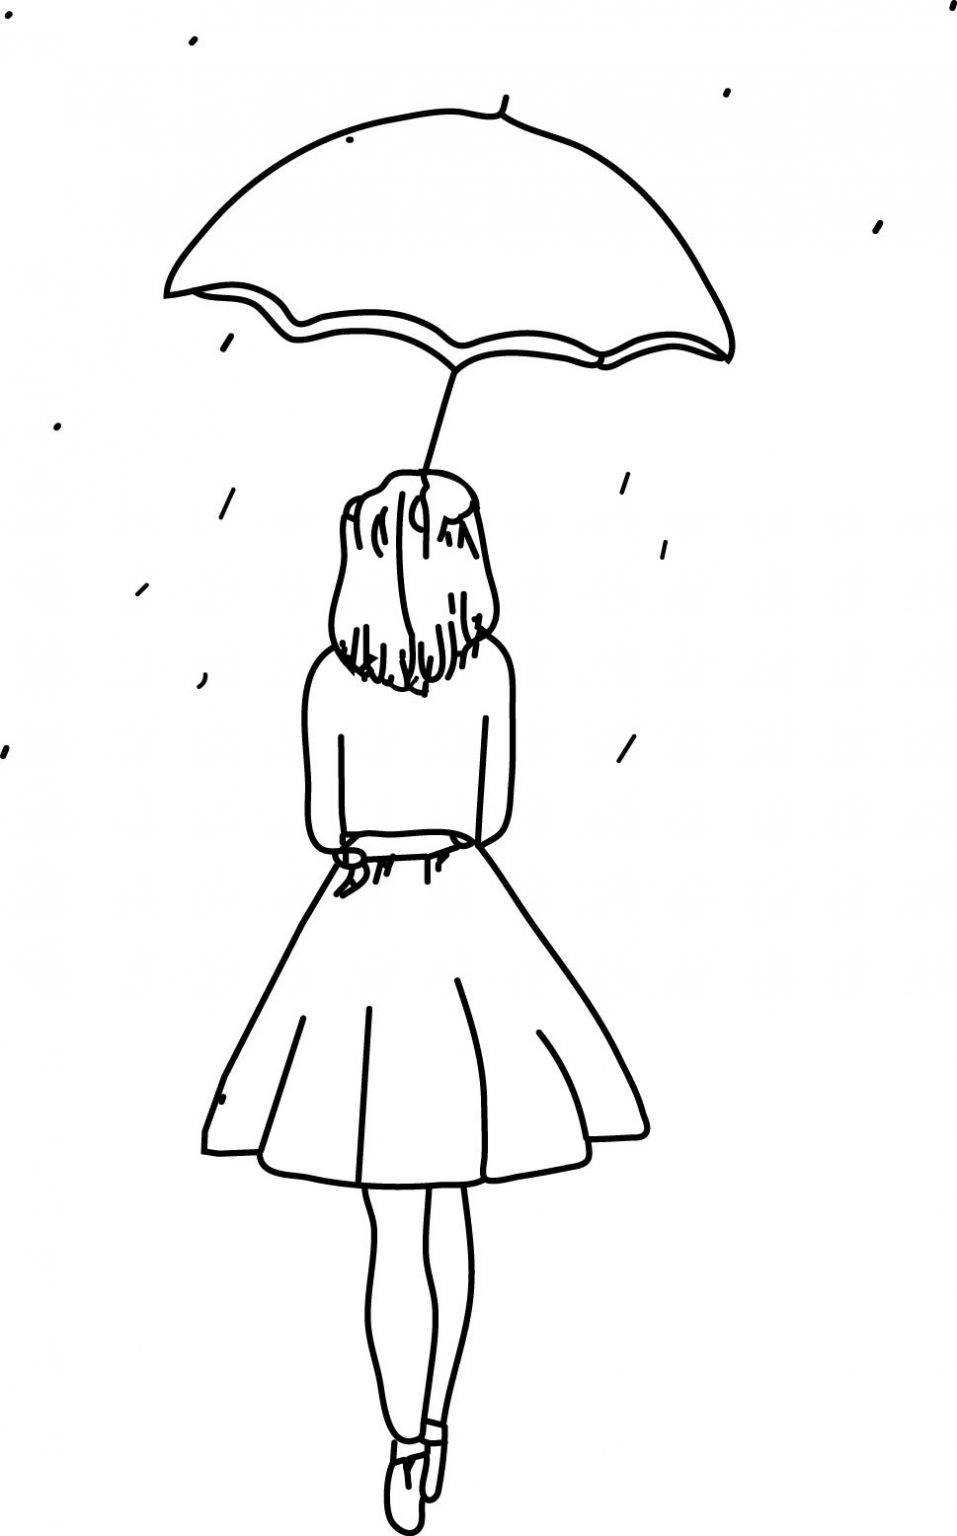 girl with umbrella coloring page – Wecoloringpage.com